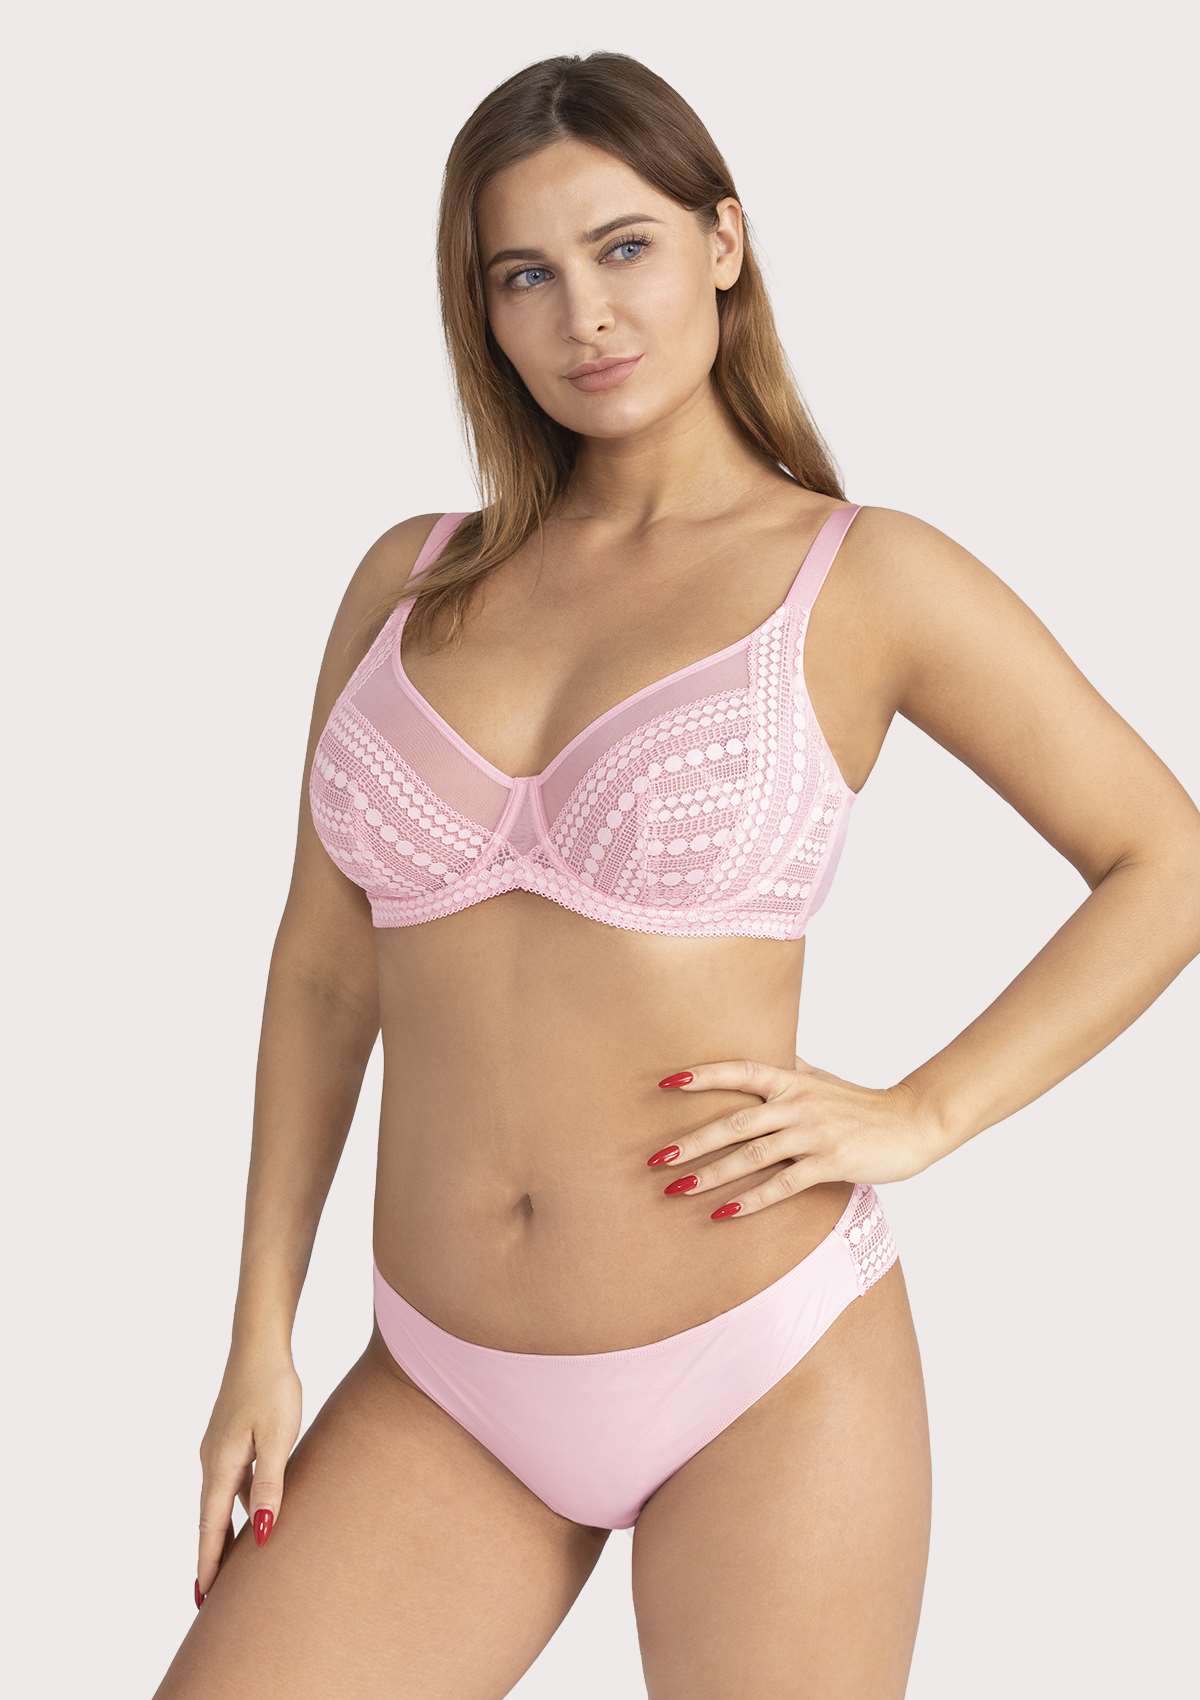 HSIA Heroine Lace Bra And Panties Set: Most Comfortable Supportive Bra - Pink / 40 / DD/E